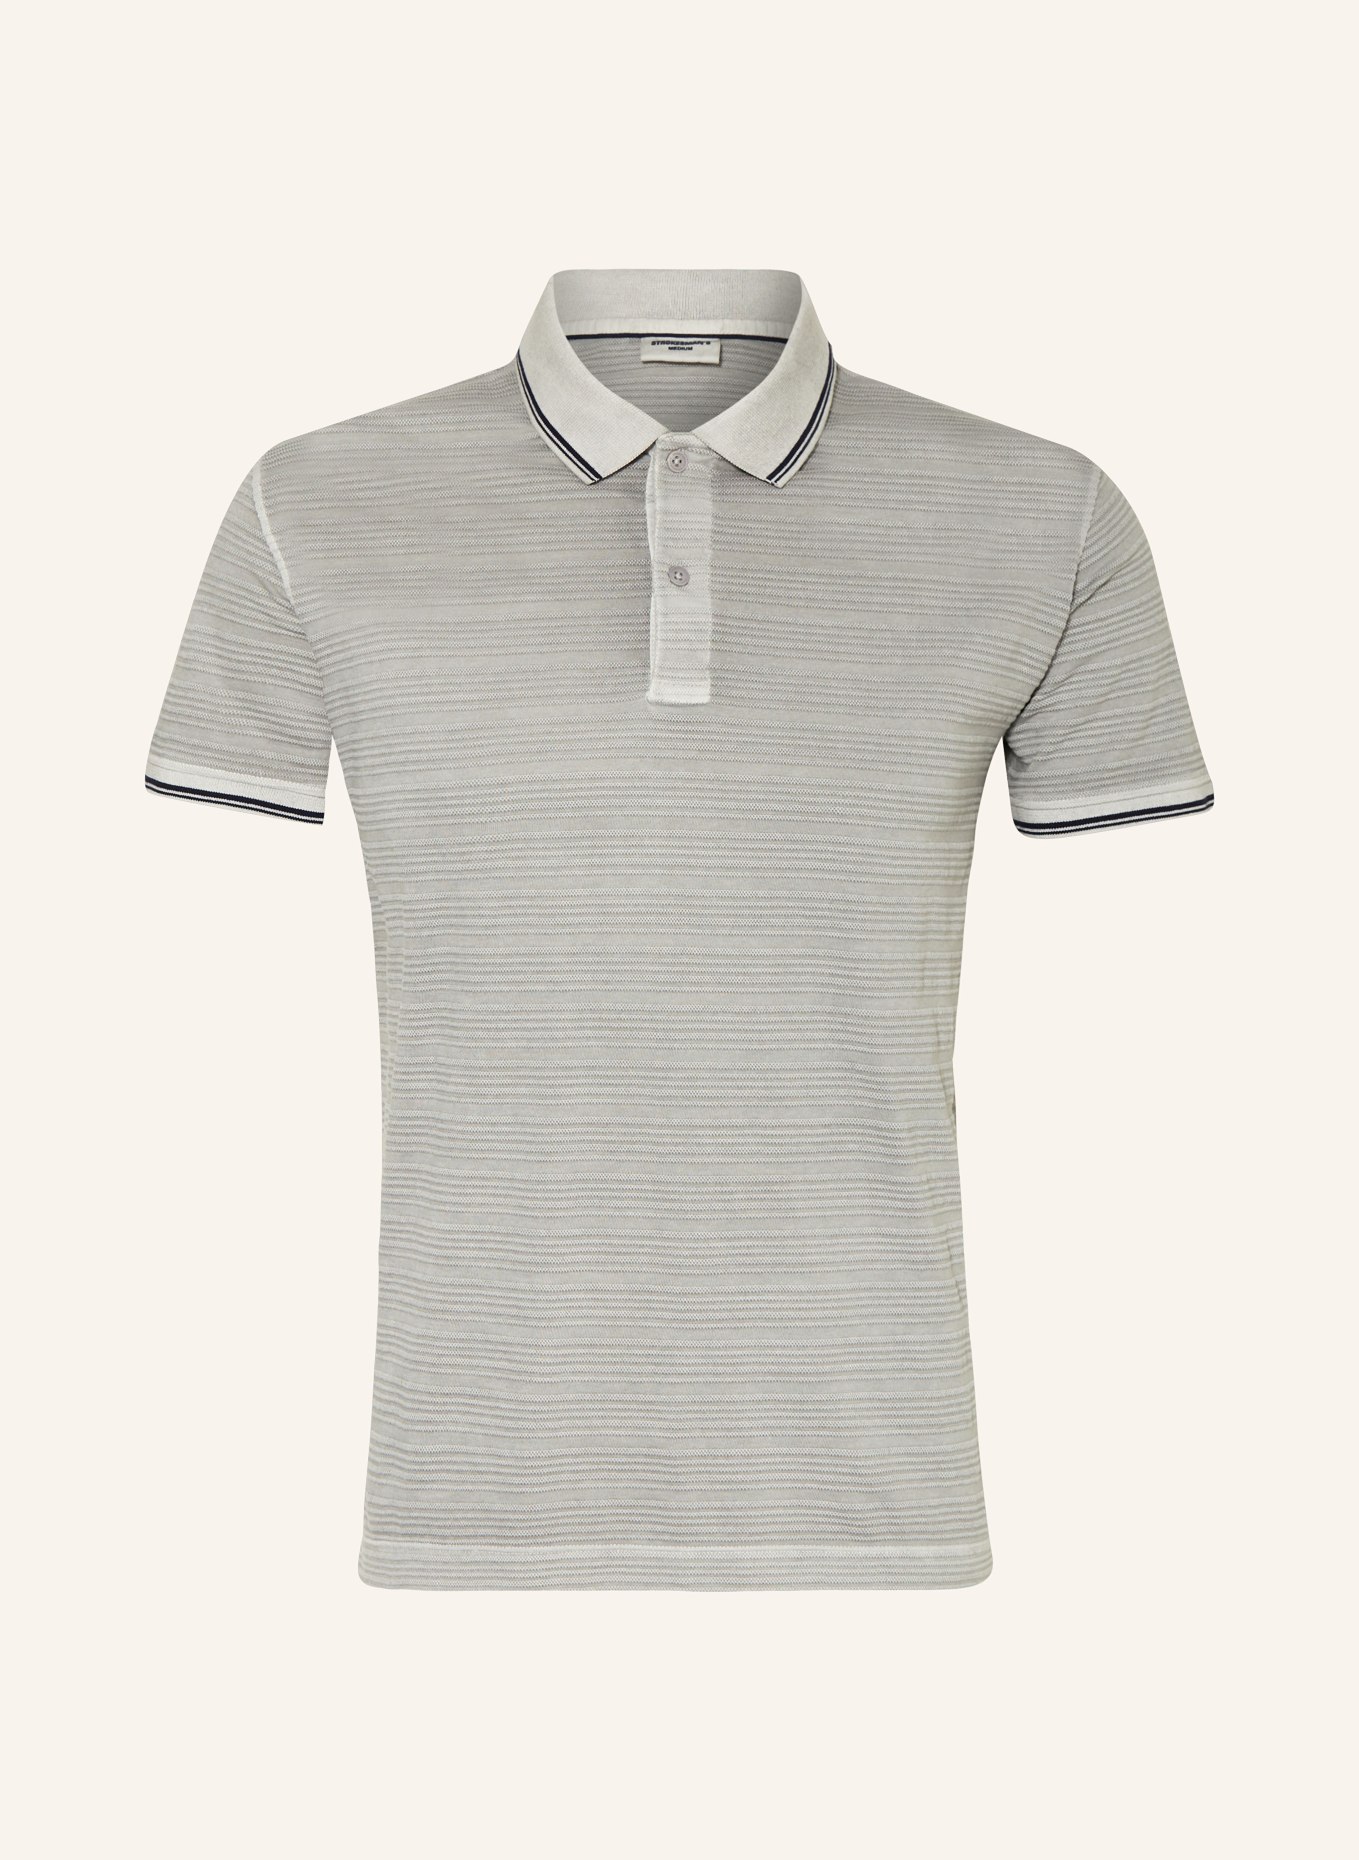 STROKESMAN'S Knitted polo shirt, Color: GRAY (Image 1)